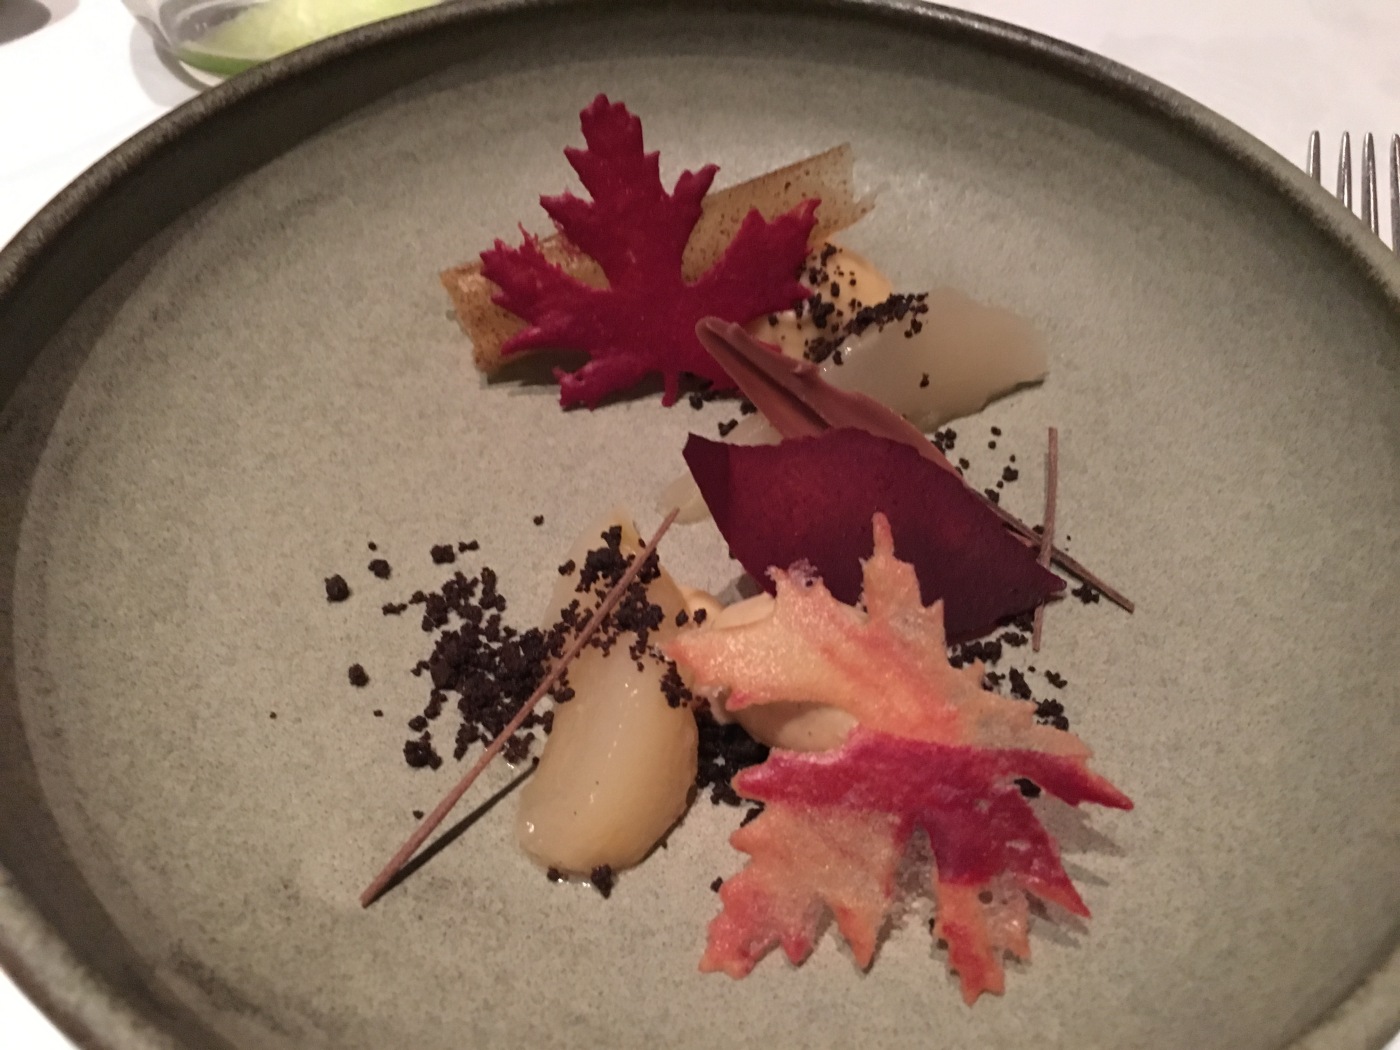 Poached Pear and Custard Apple Cream with Leaves at Tetsuya's Restaurant in Sydney, Australia